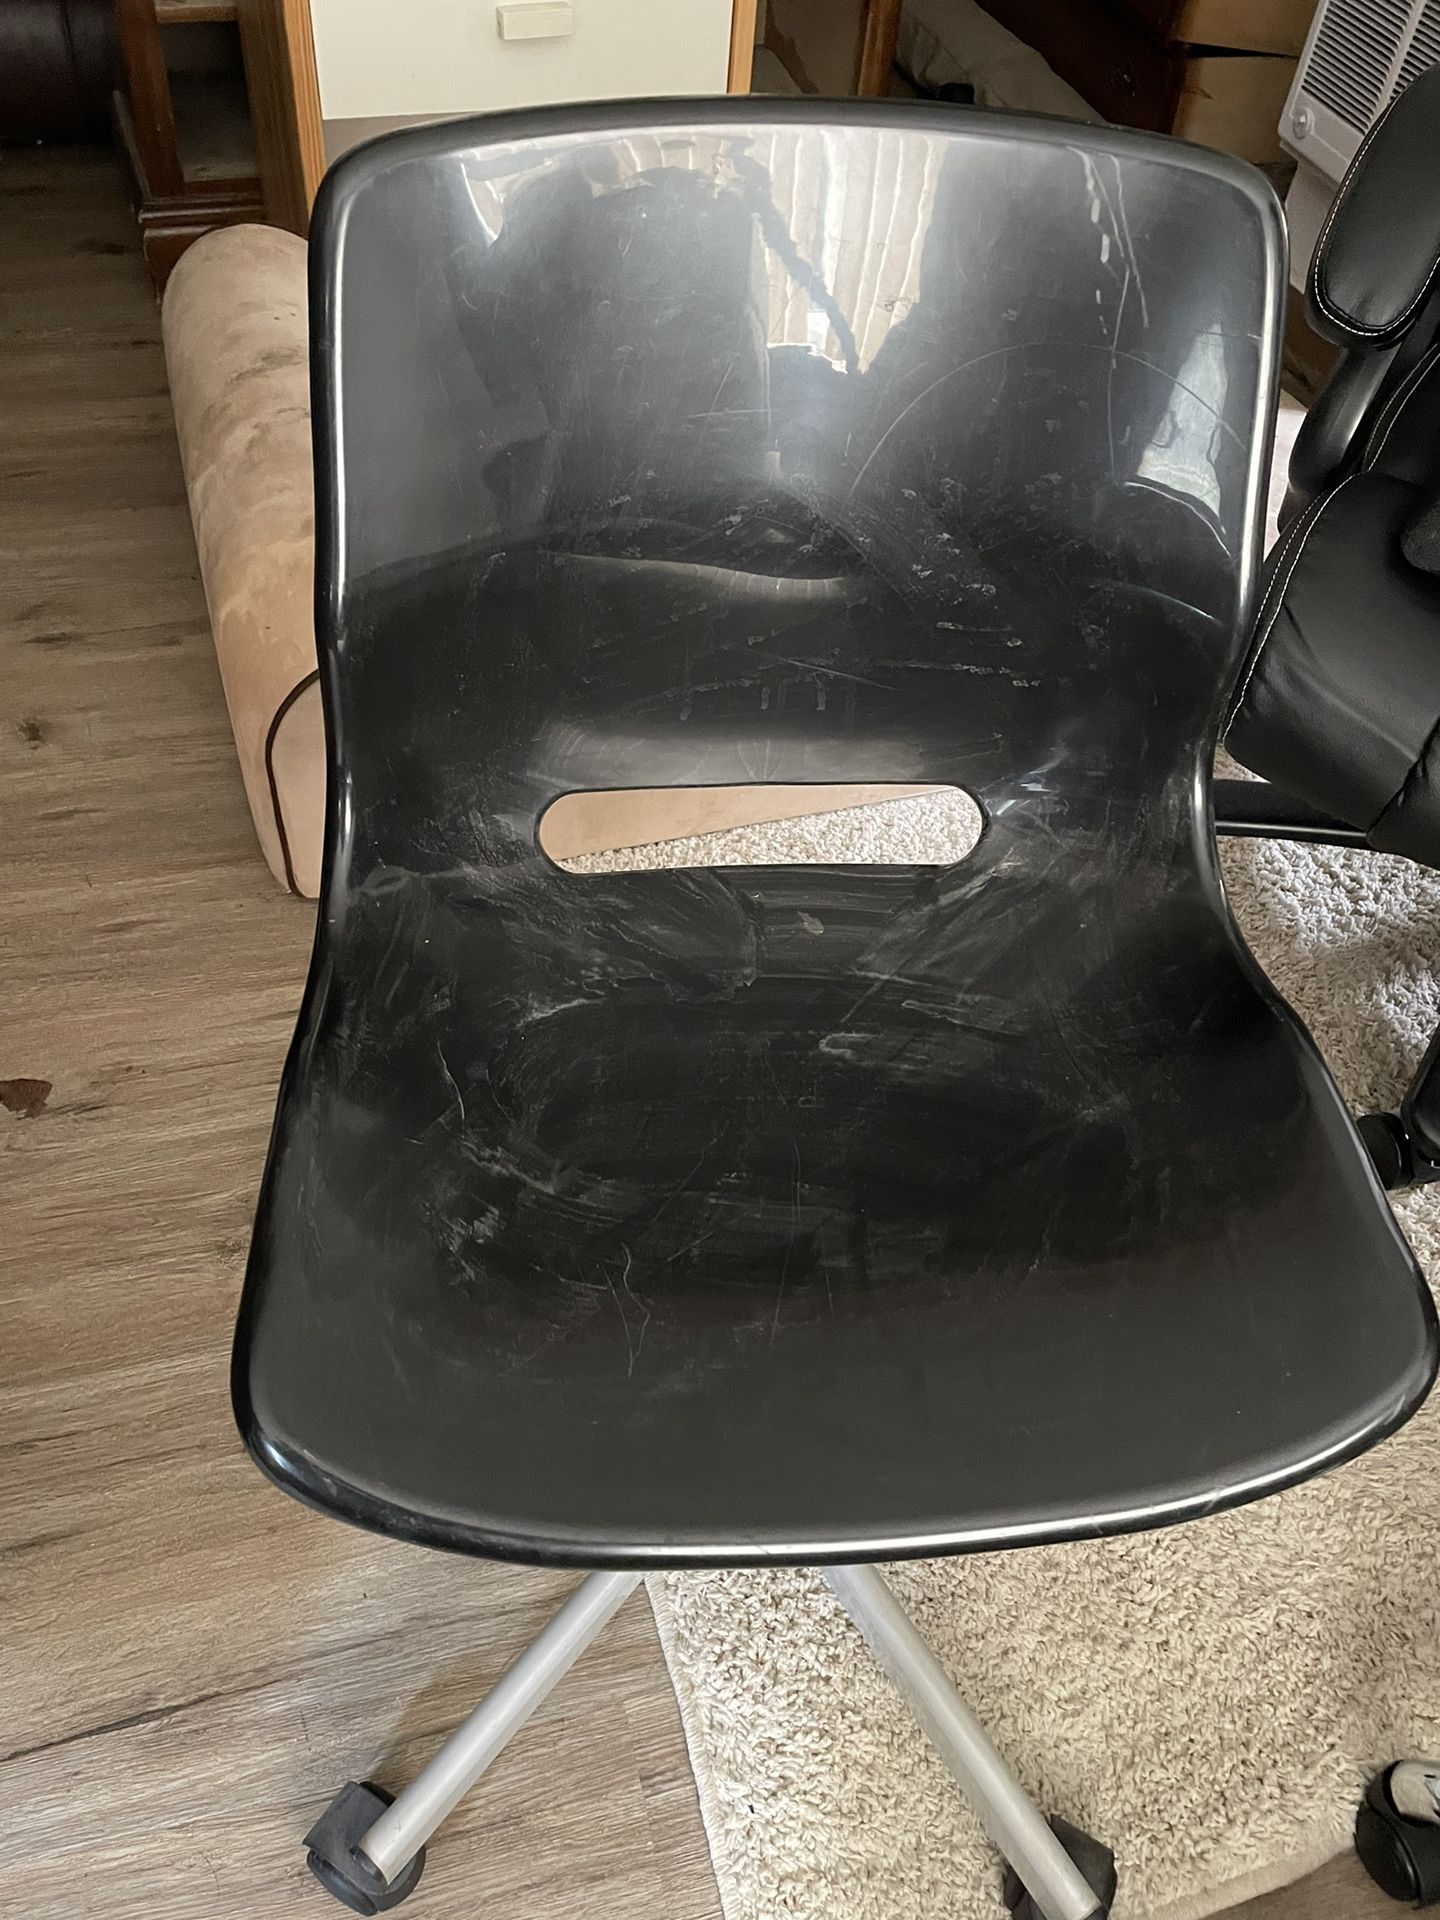 2 Desk Chairs